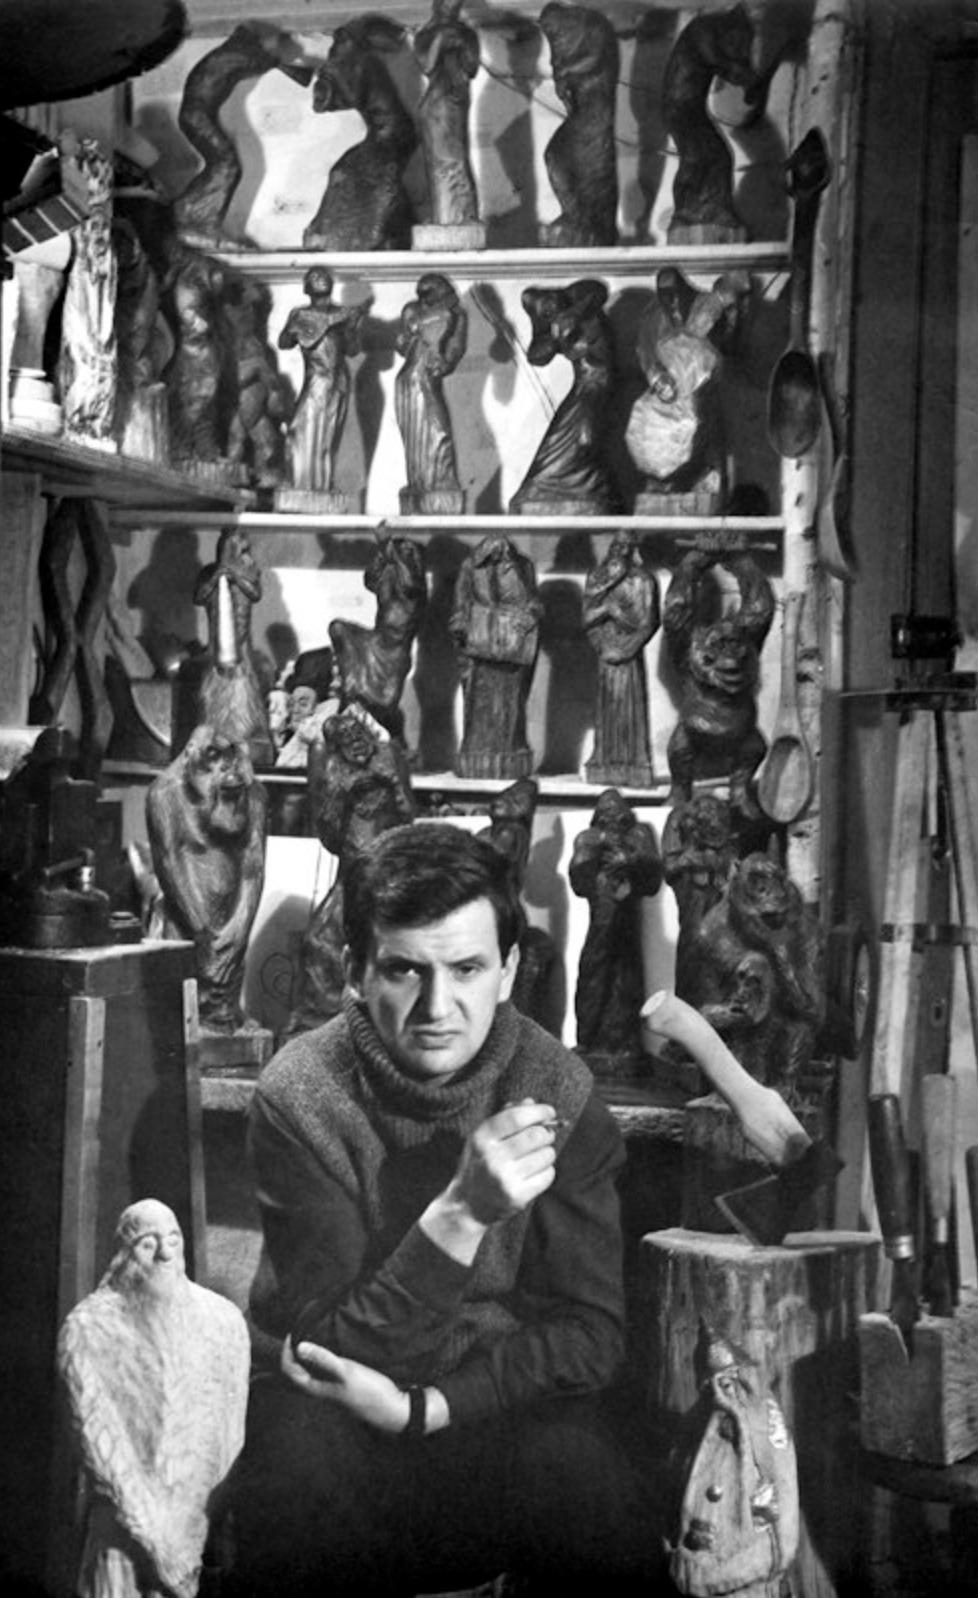 Eduard Bersudsky surrounded by his wooden sculptures on shelves